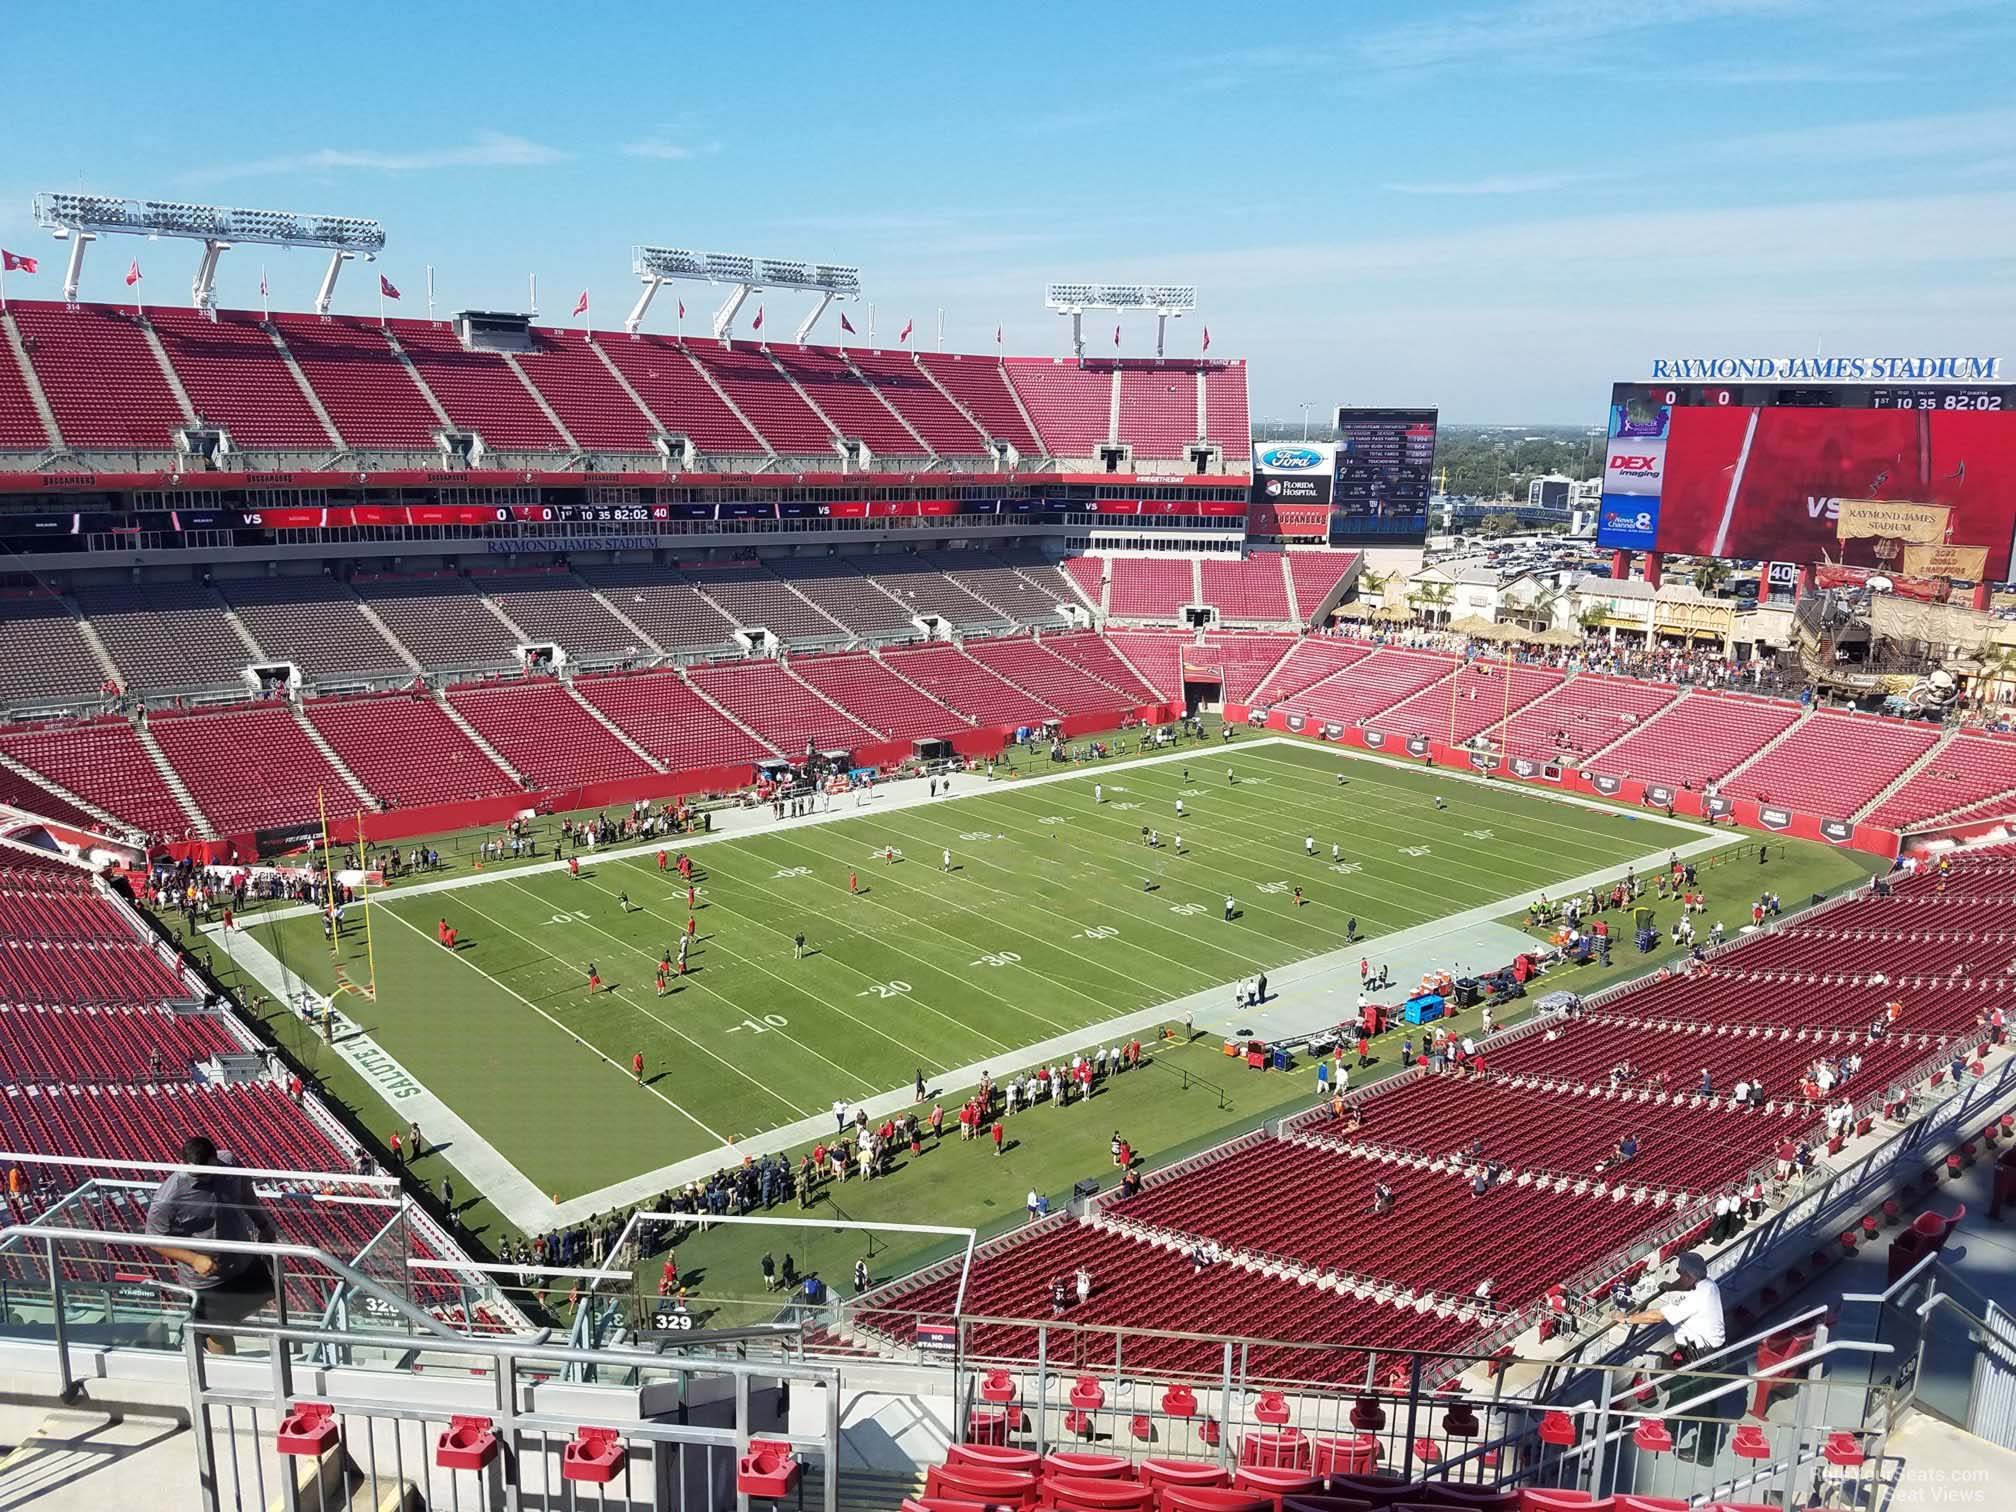 Raymond James Stadium Seating Chart With Seat Numbers And Rows Two